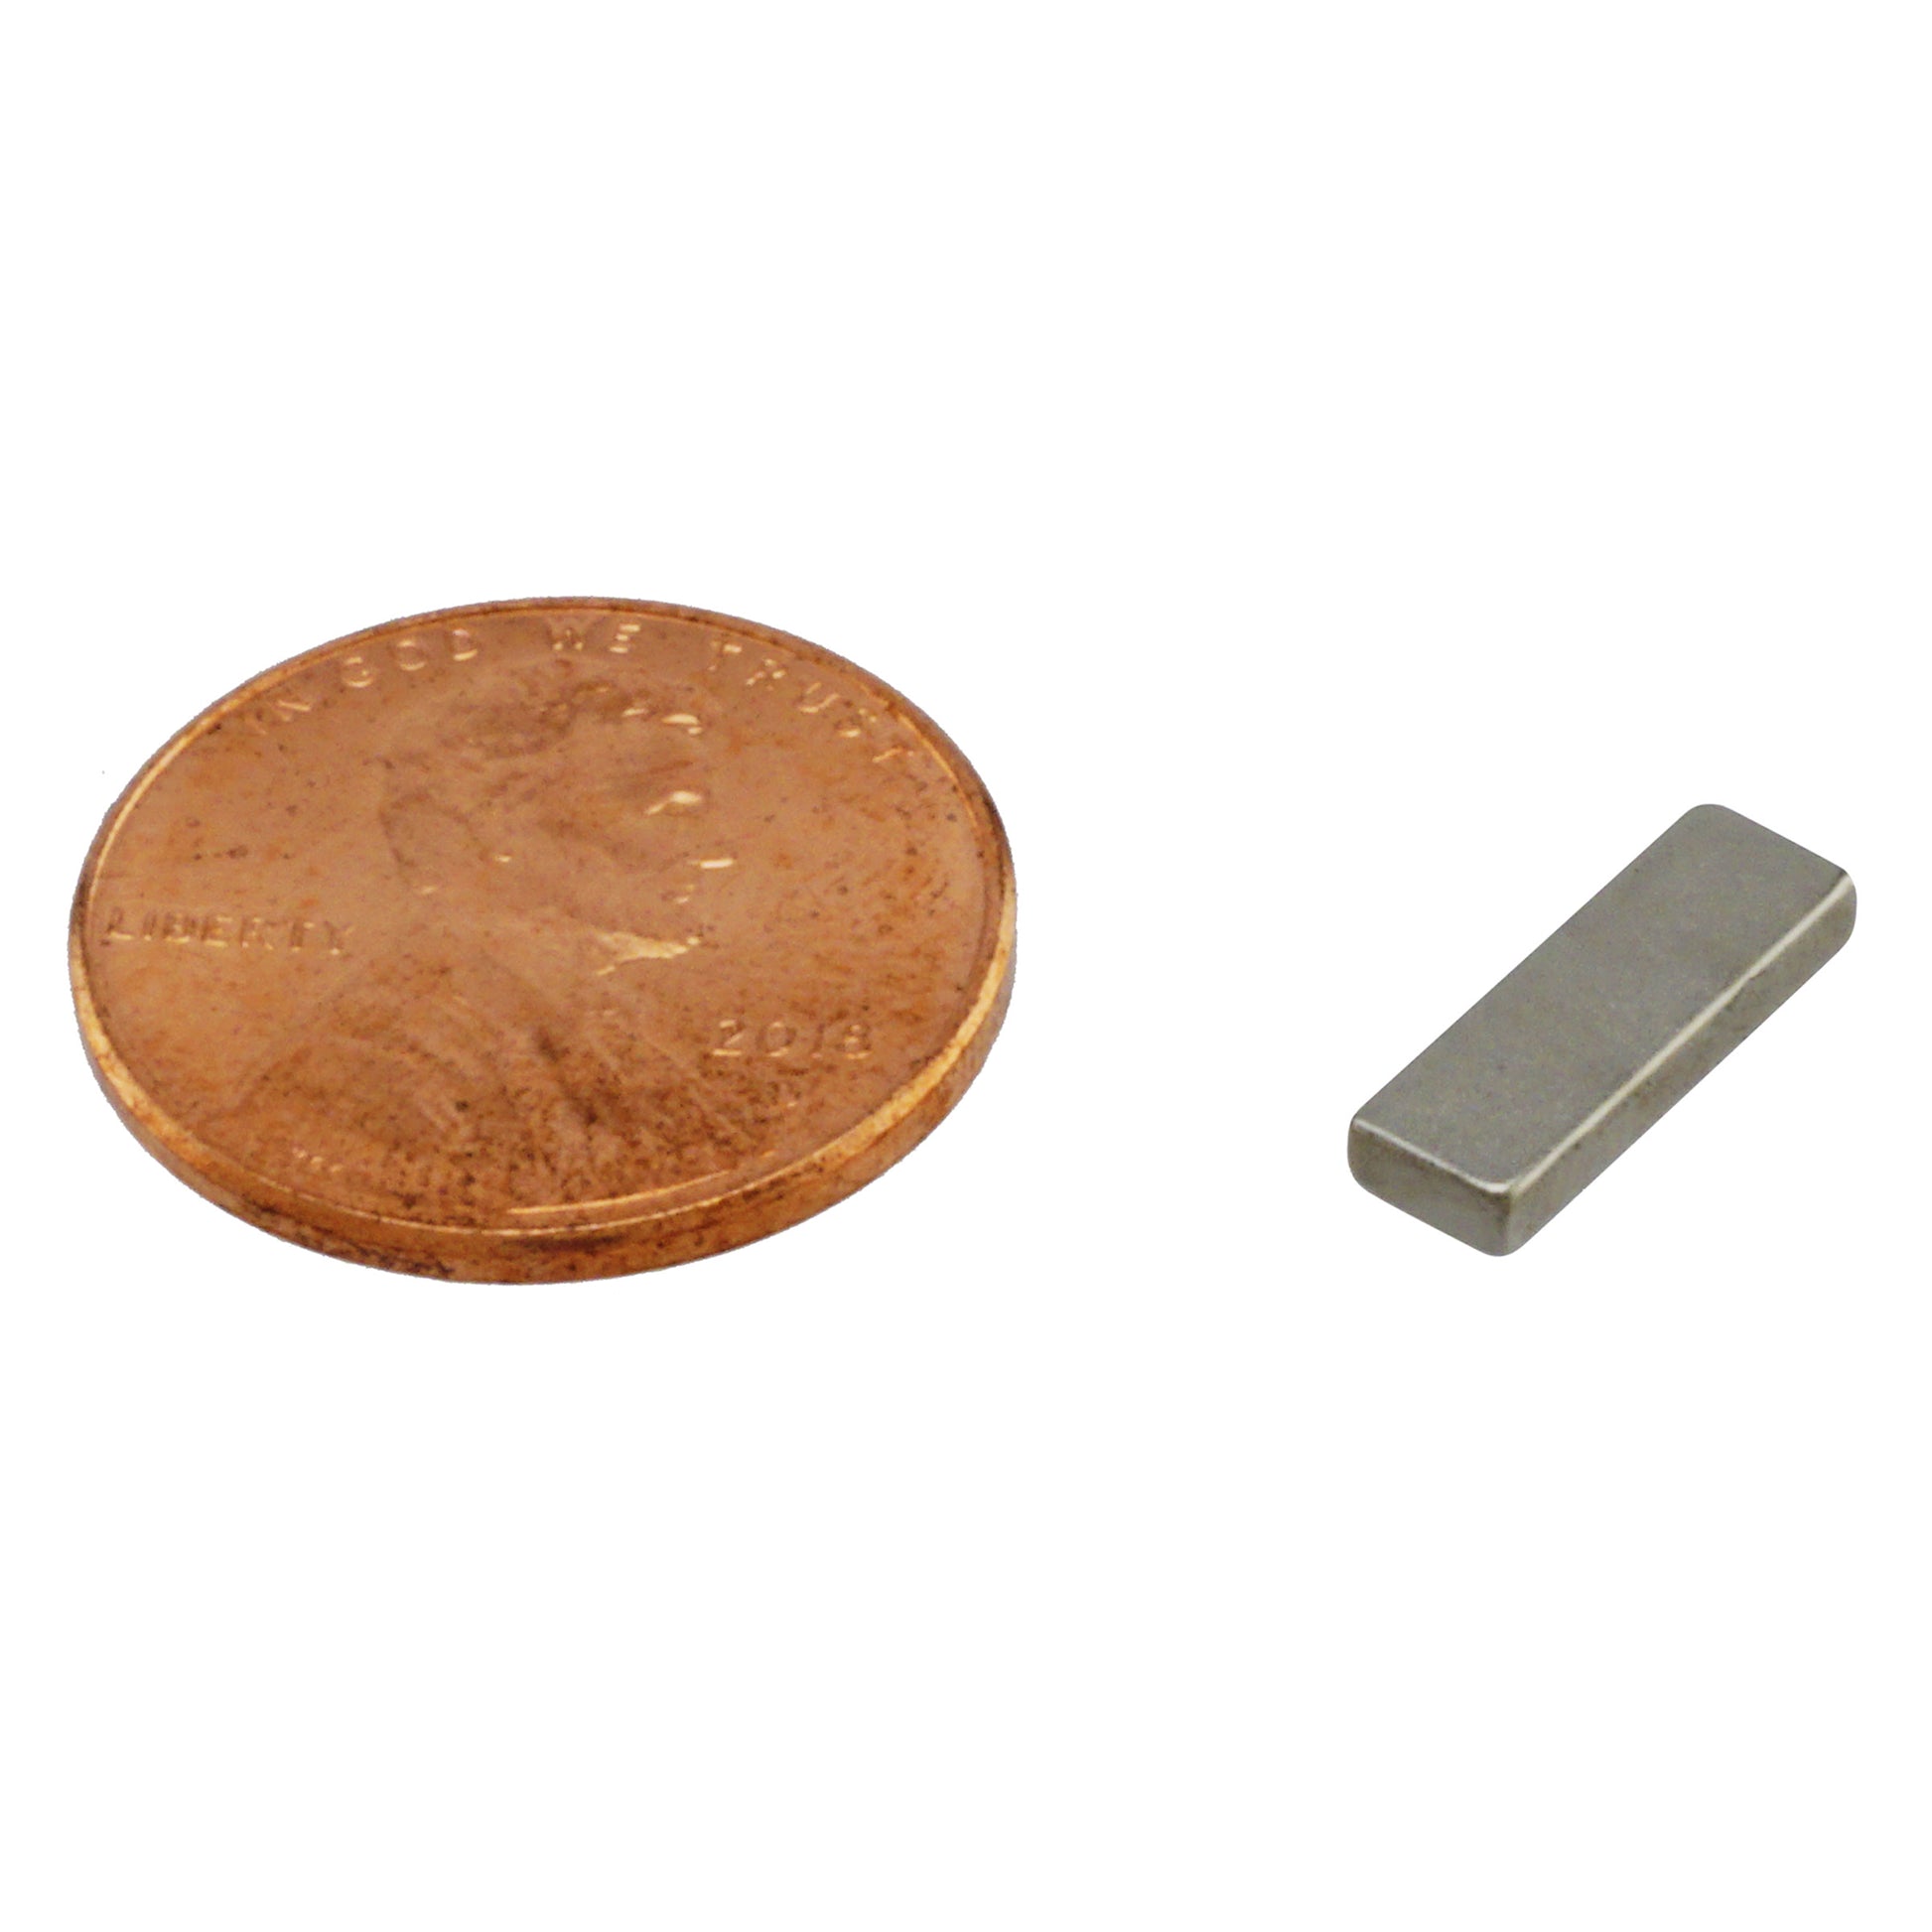 Load image into Gallery viewer, NB0781547N-35 Neodymium Block Magnet - Compared to Penny for Size Reference